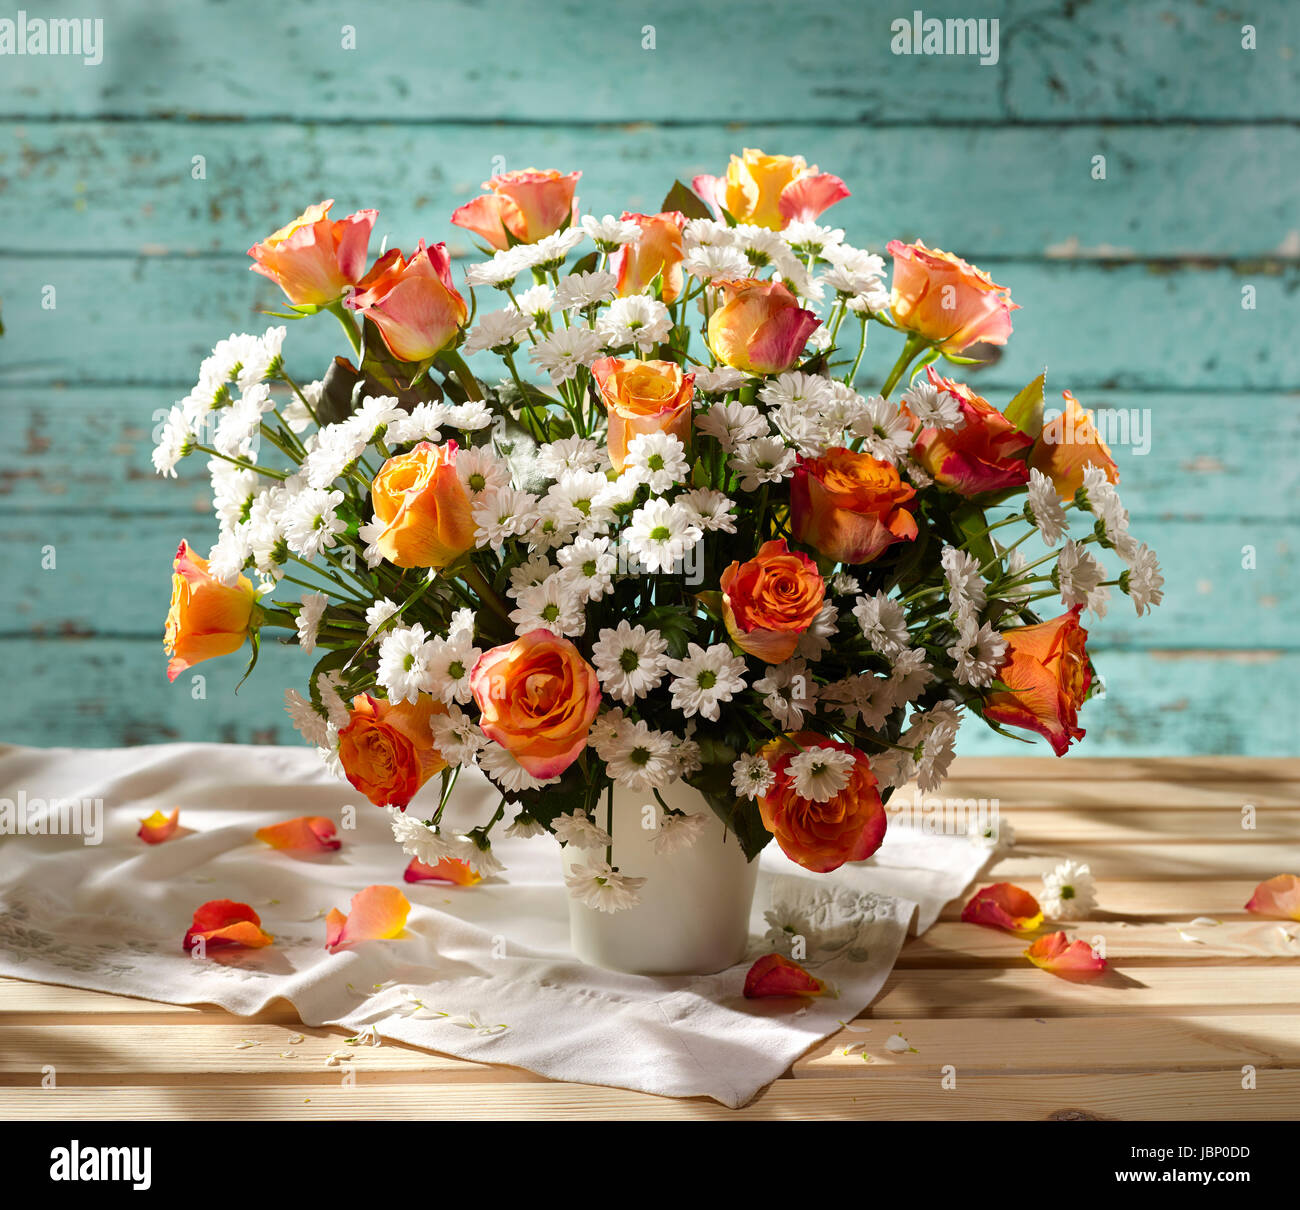 Bouquet of flowers with roses, margaritas. Stock Photo